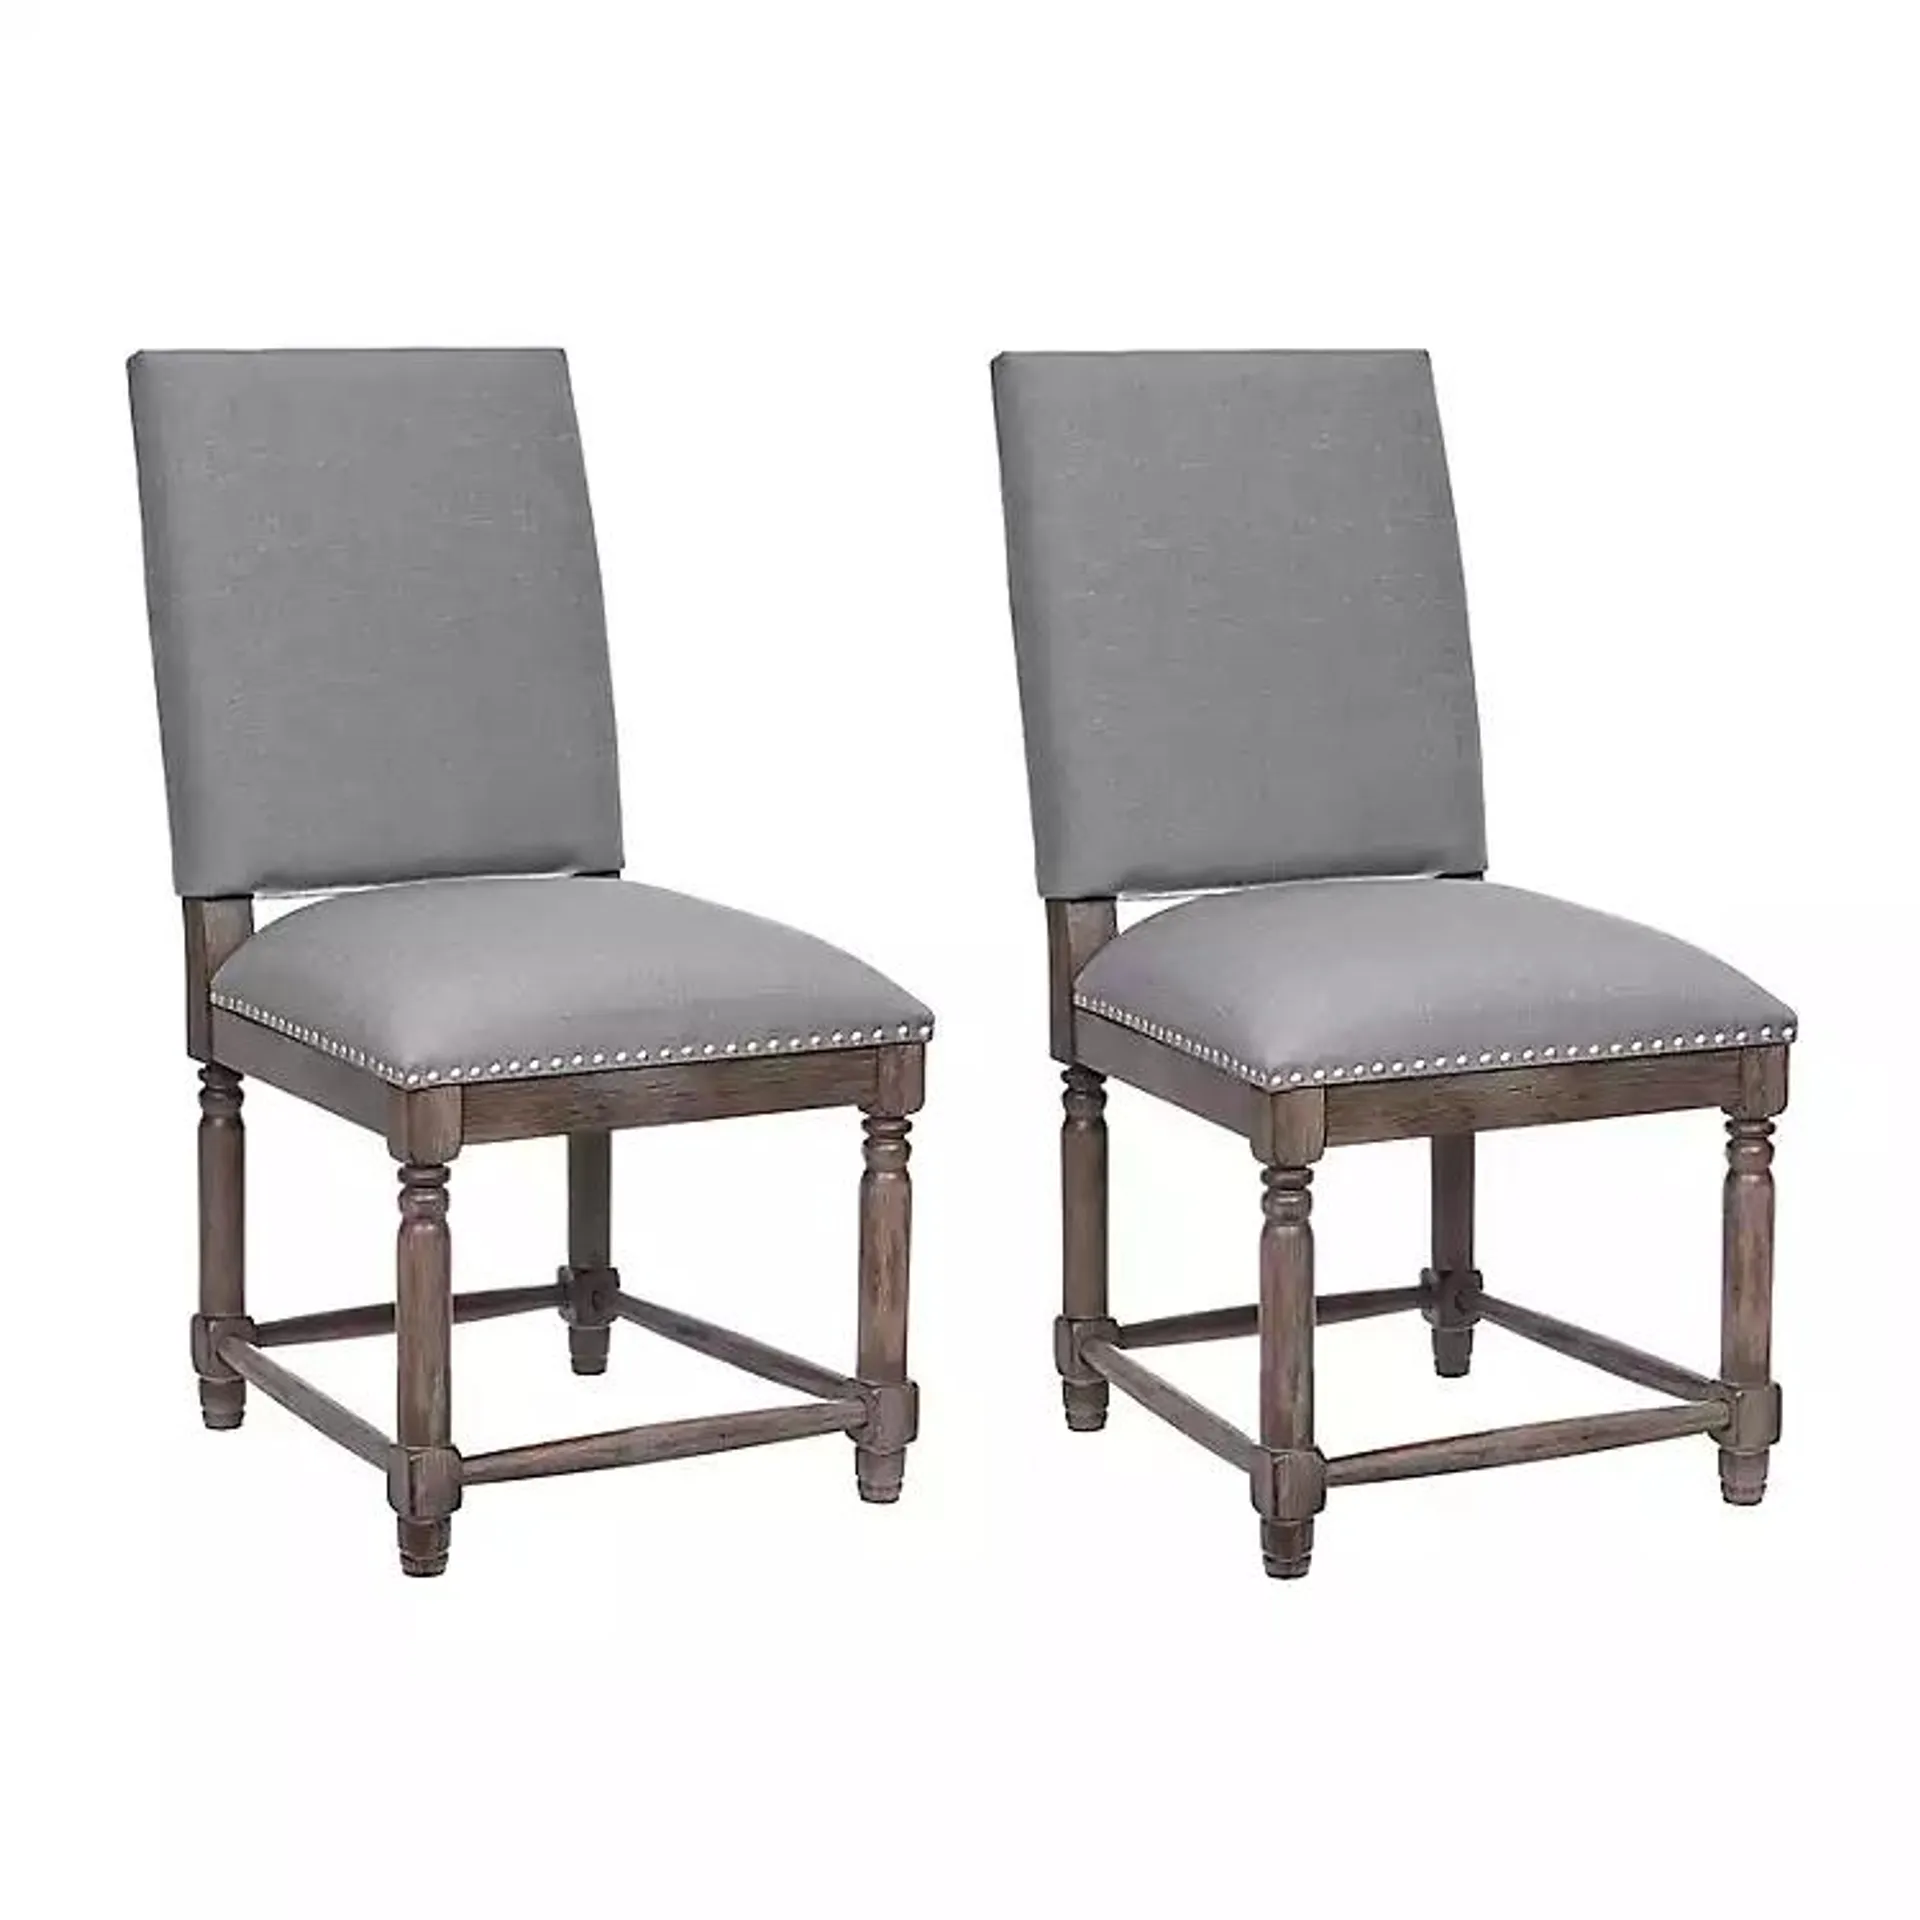 Gray Upholstered Cirque Dining Chairs, Set of 2